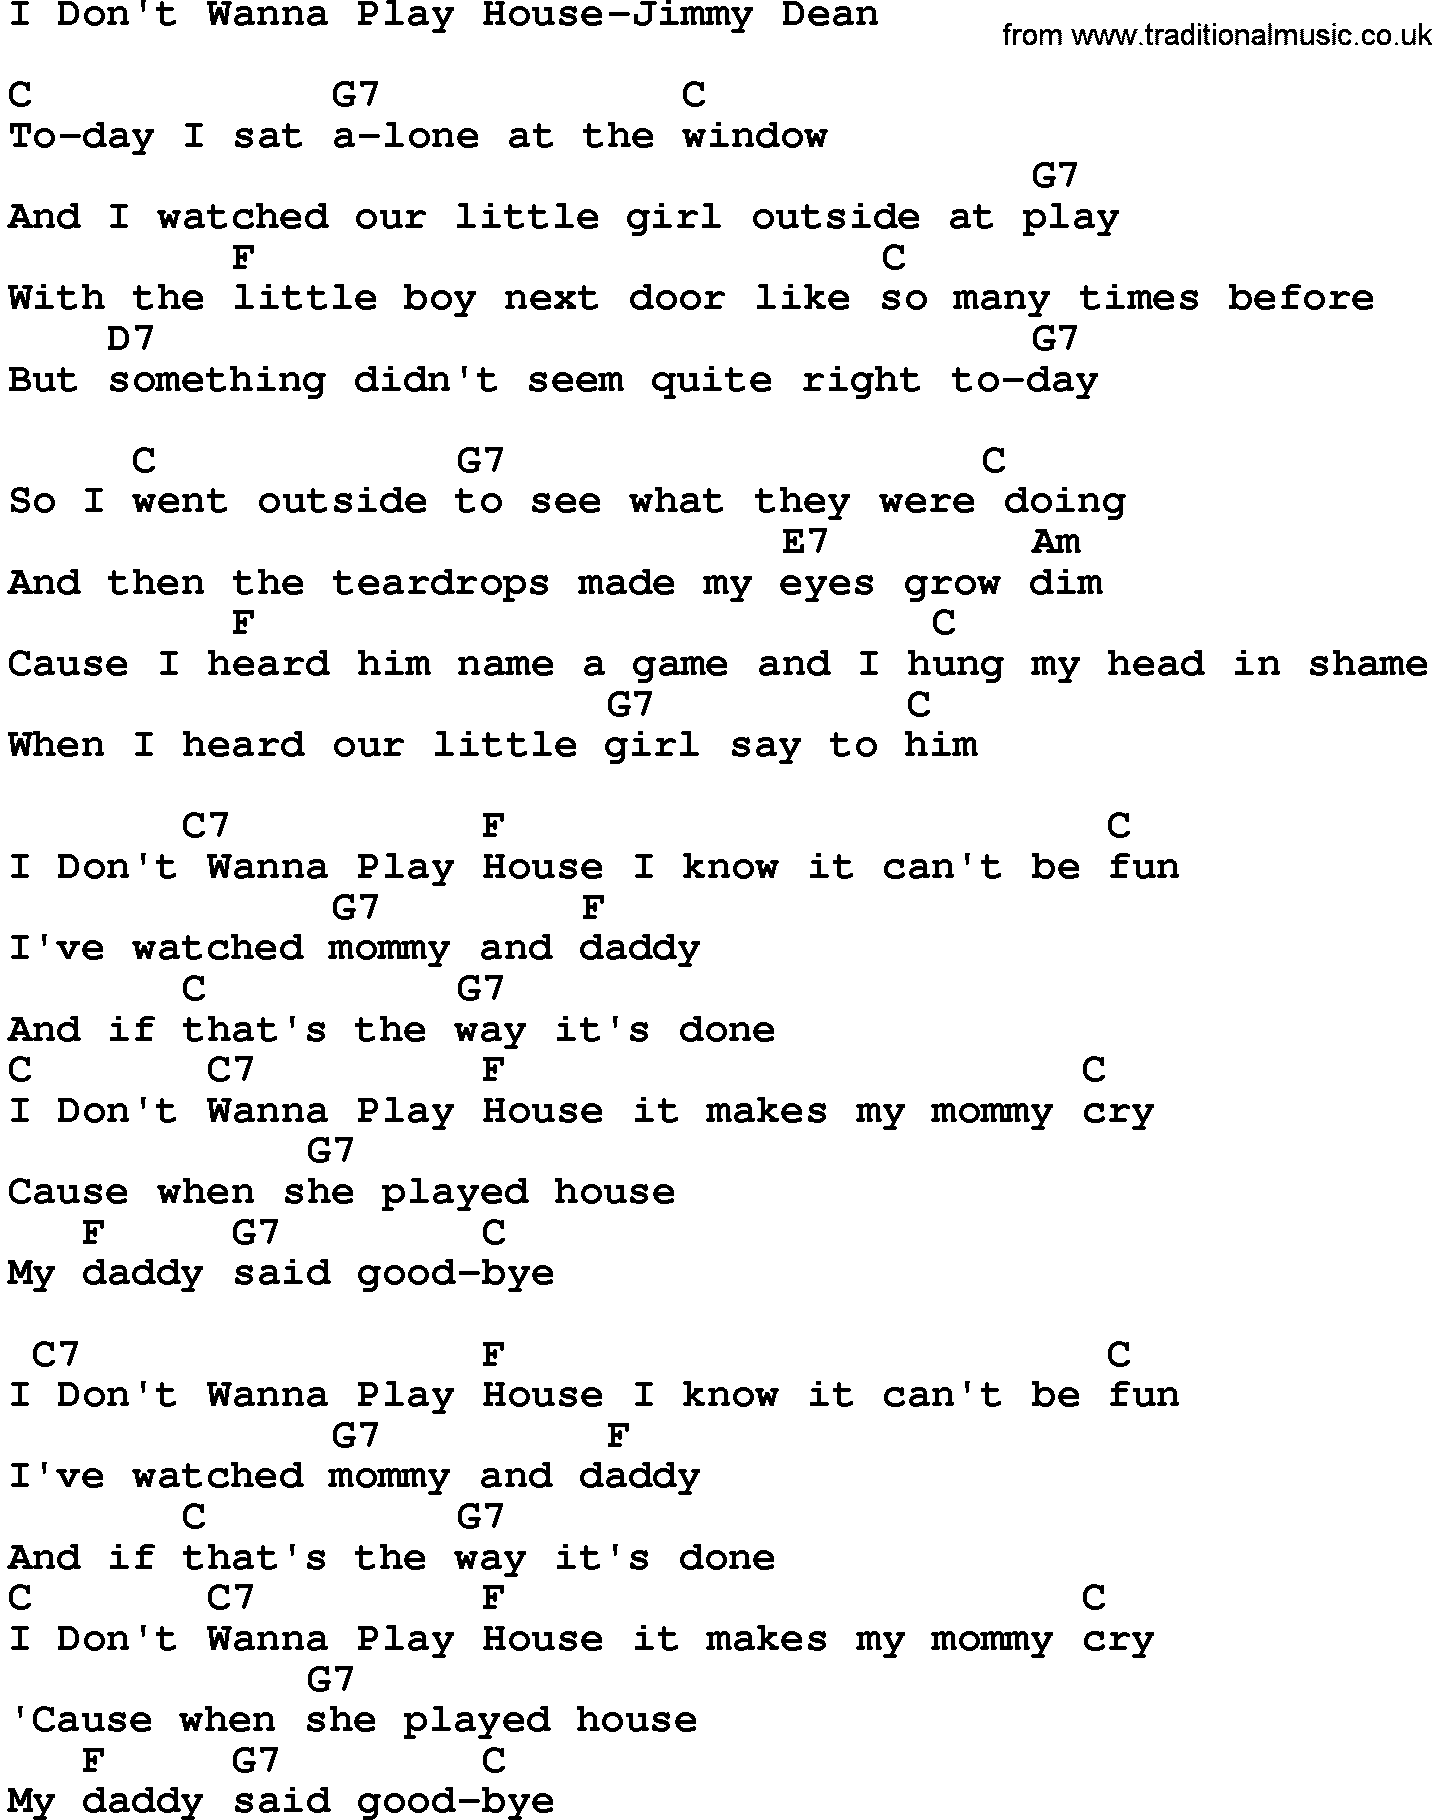 Country music song: I Don't Wanna Play House-Jimmy Dean lyrics and chords